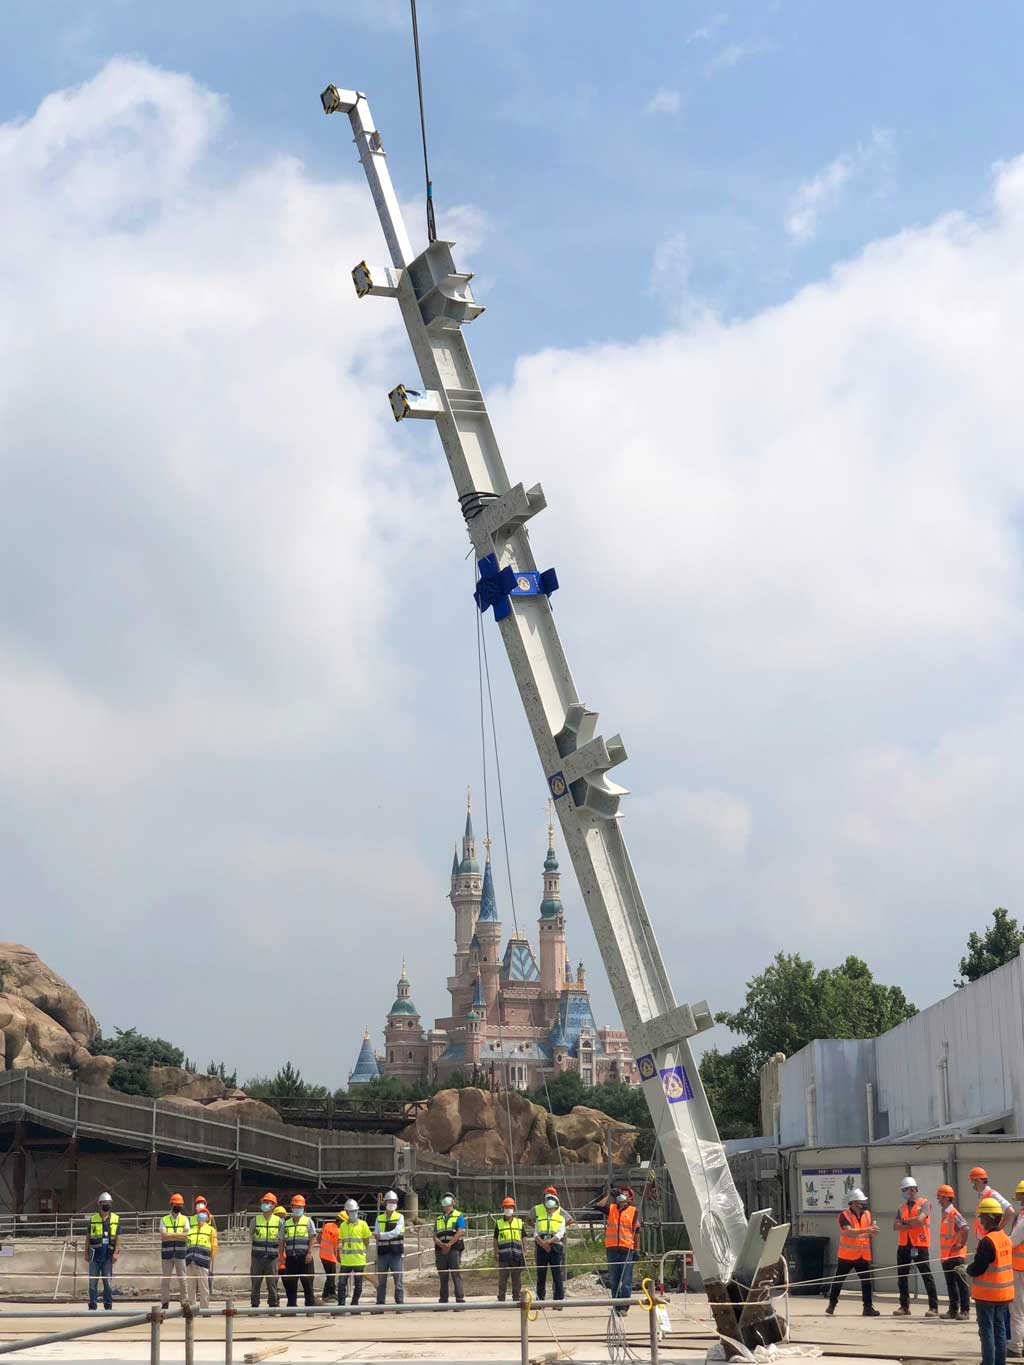 The first steel column was installed this morning, filled with thousands of Cast Members’ and Imagineers’ signatures